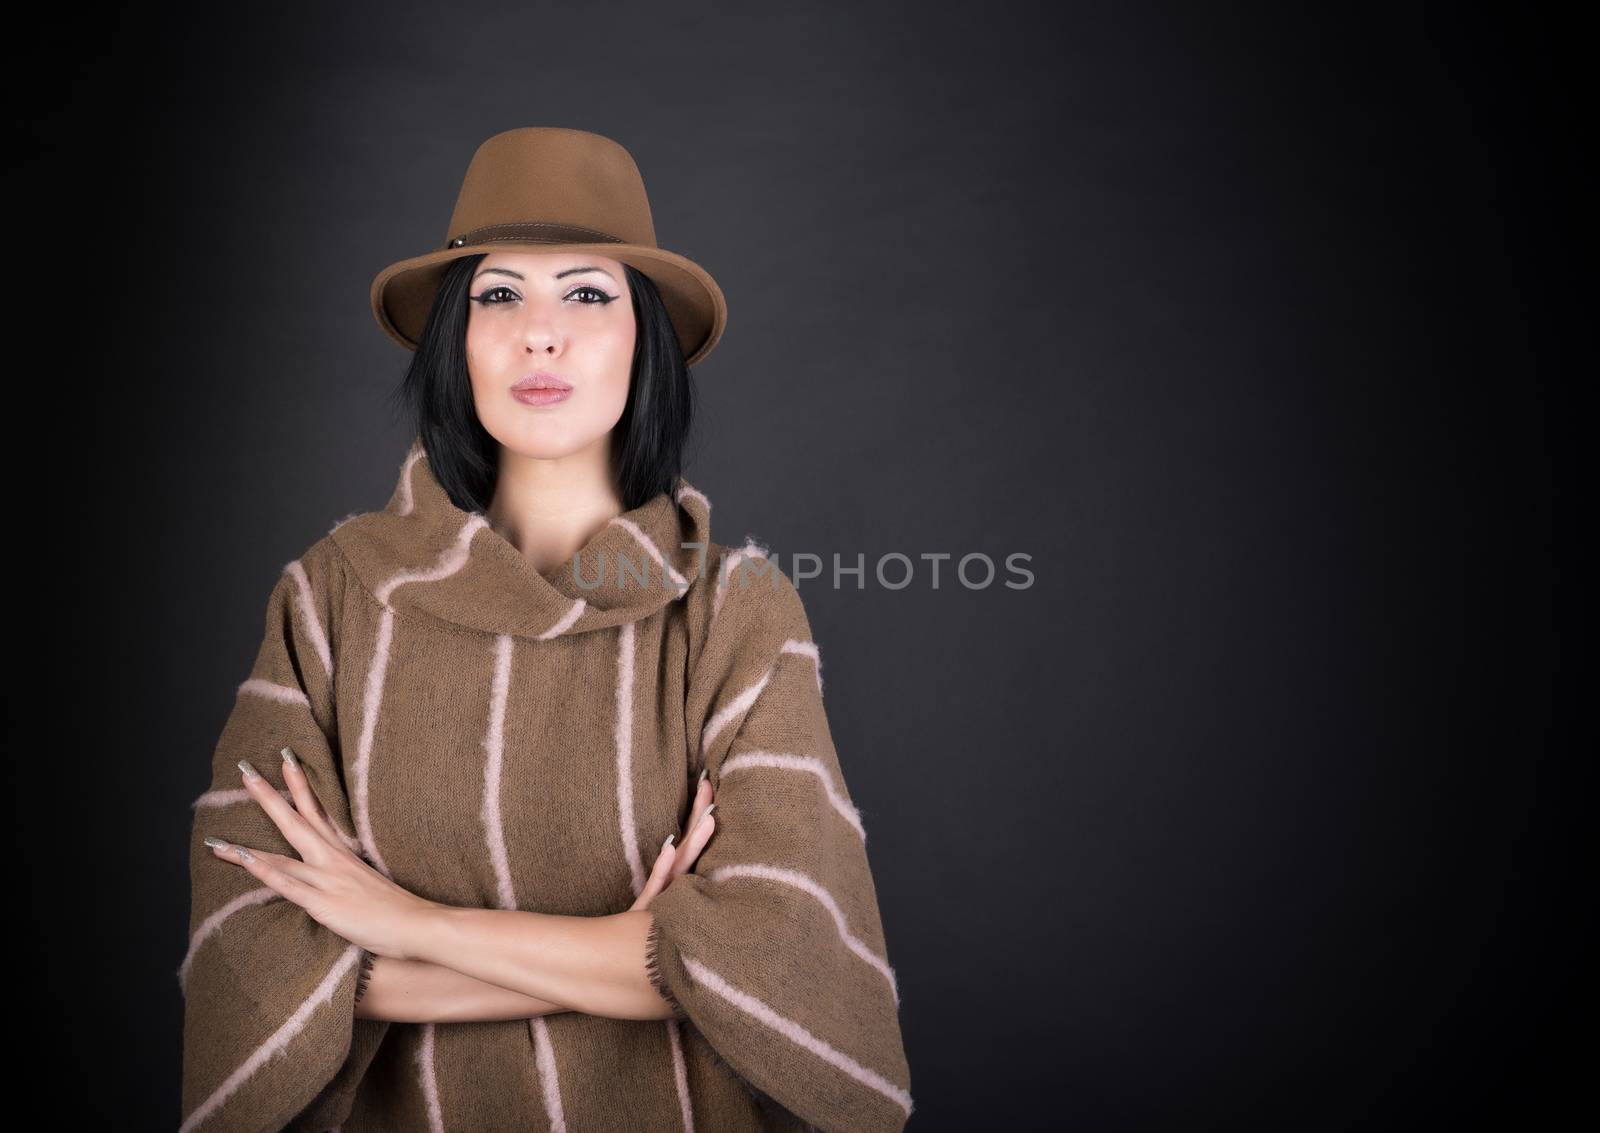 Fashion beautiful woman in country outfit and hat looking in camera on black background
